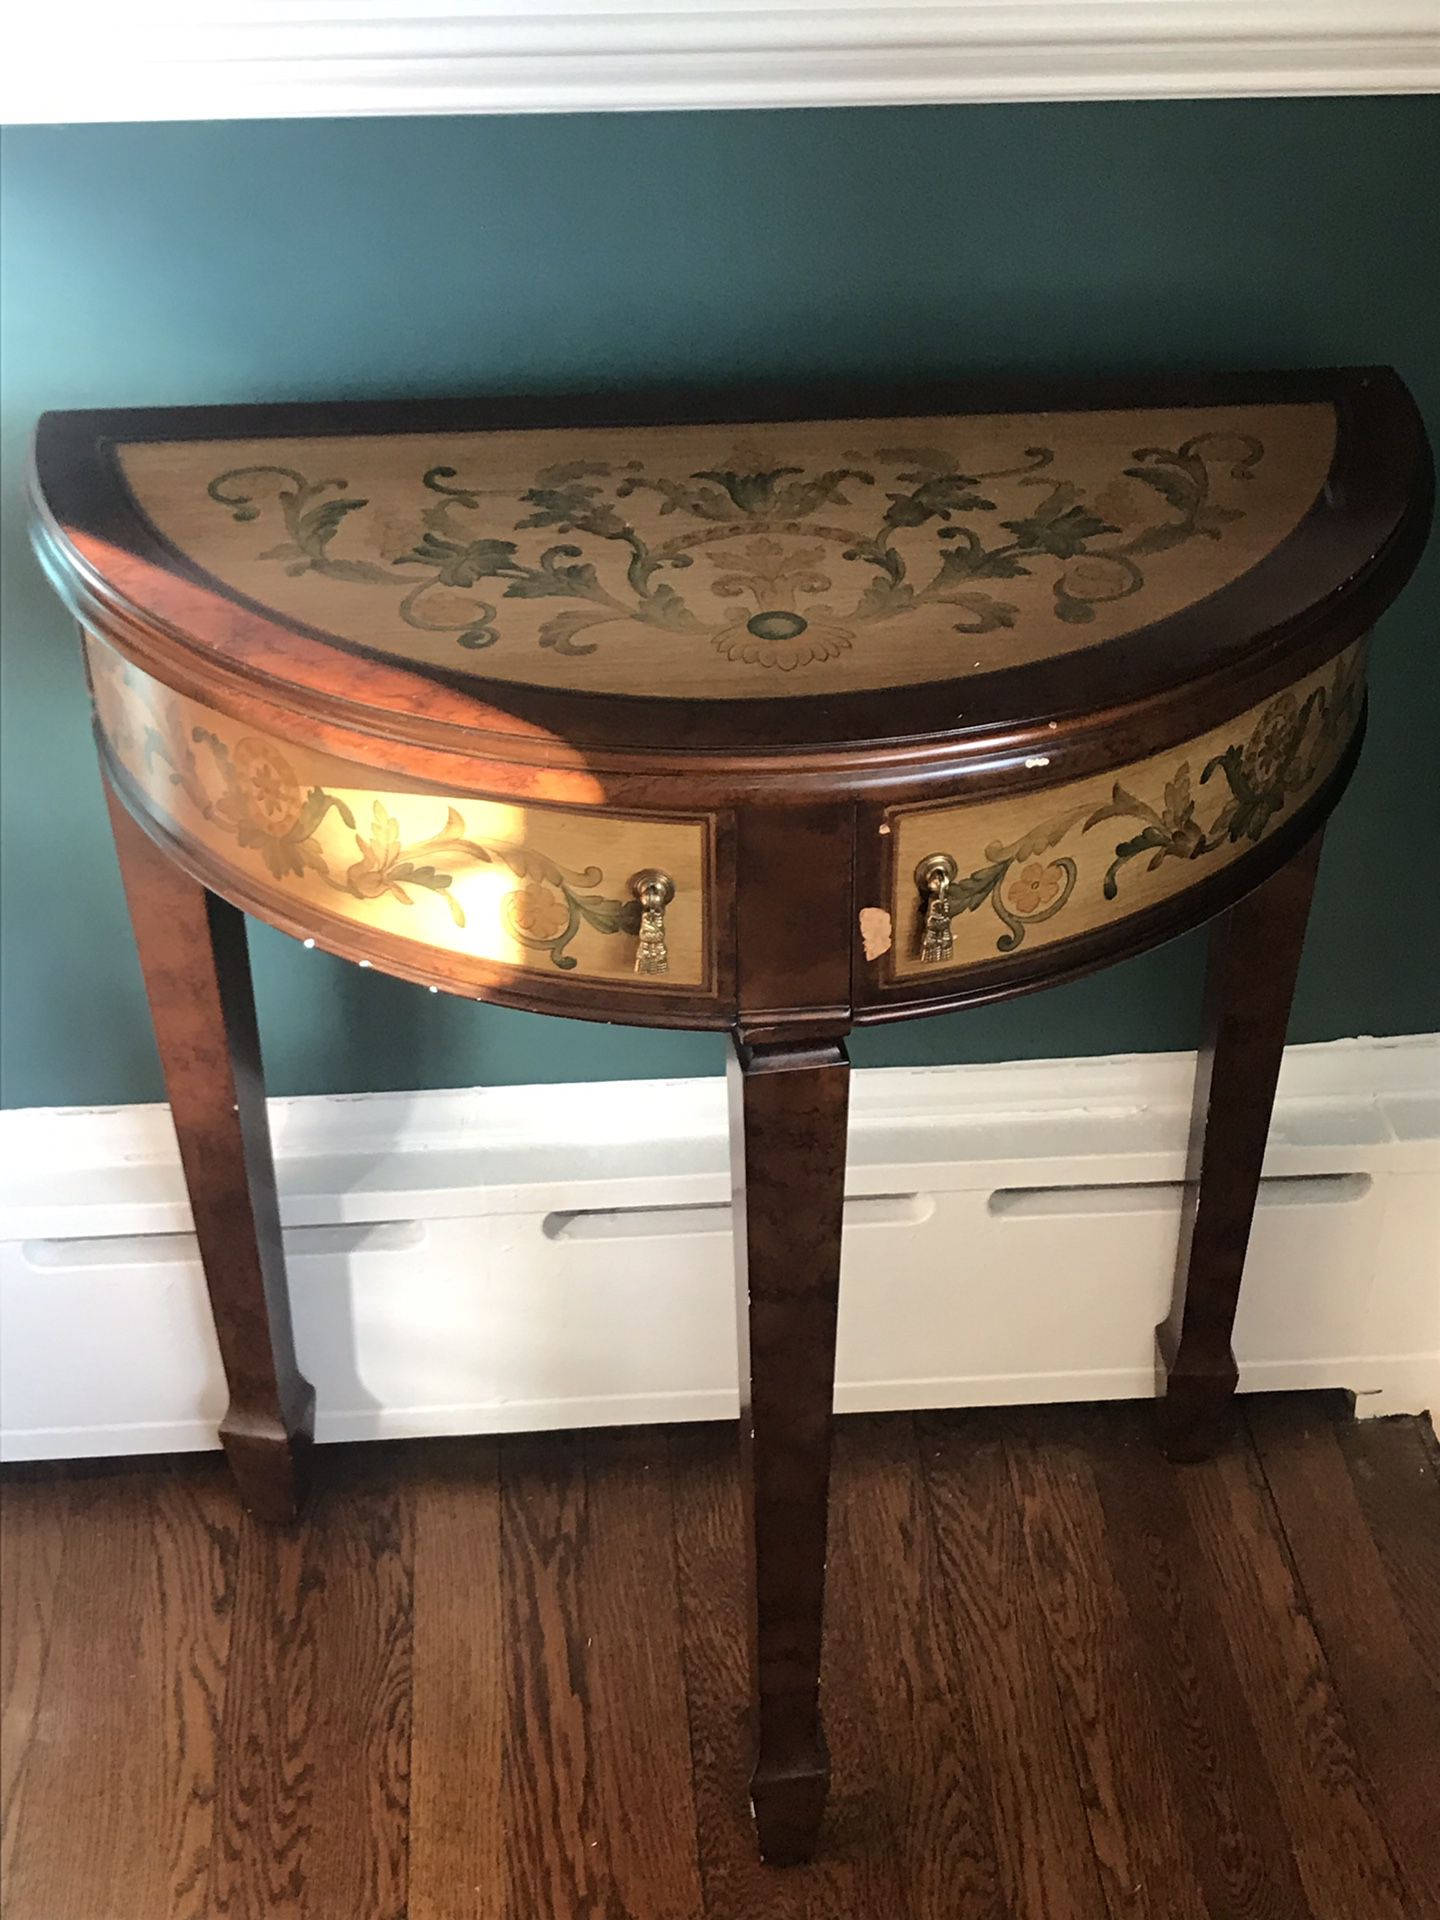 Antique Mahogany Half Moon Side Table with 2 drawers and floral design